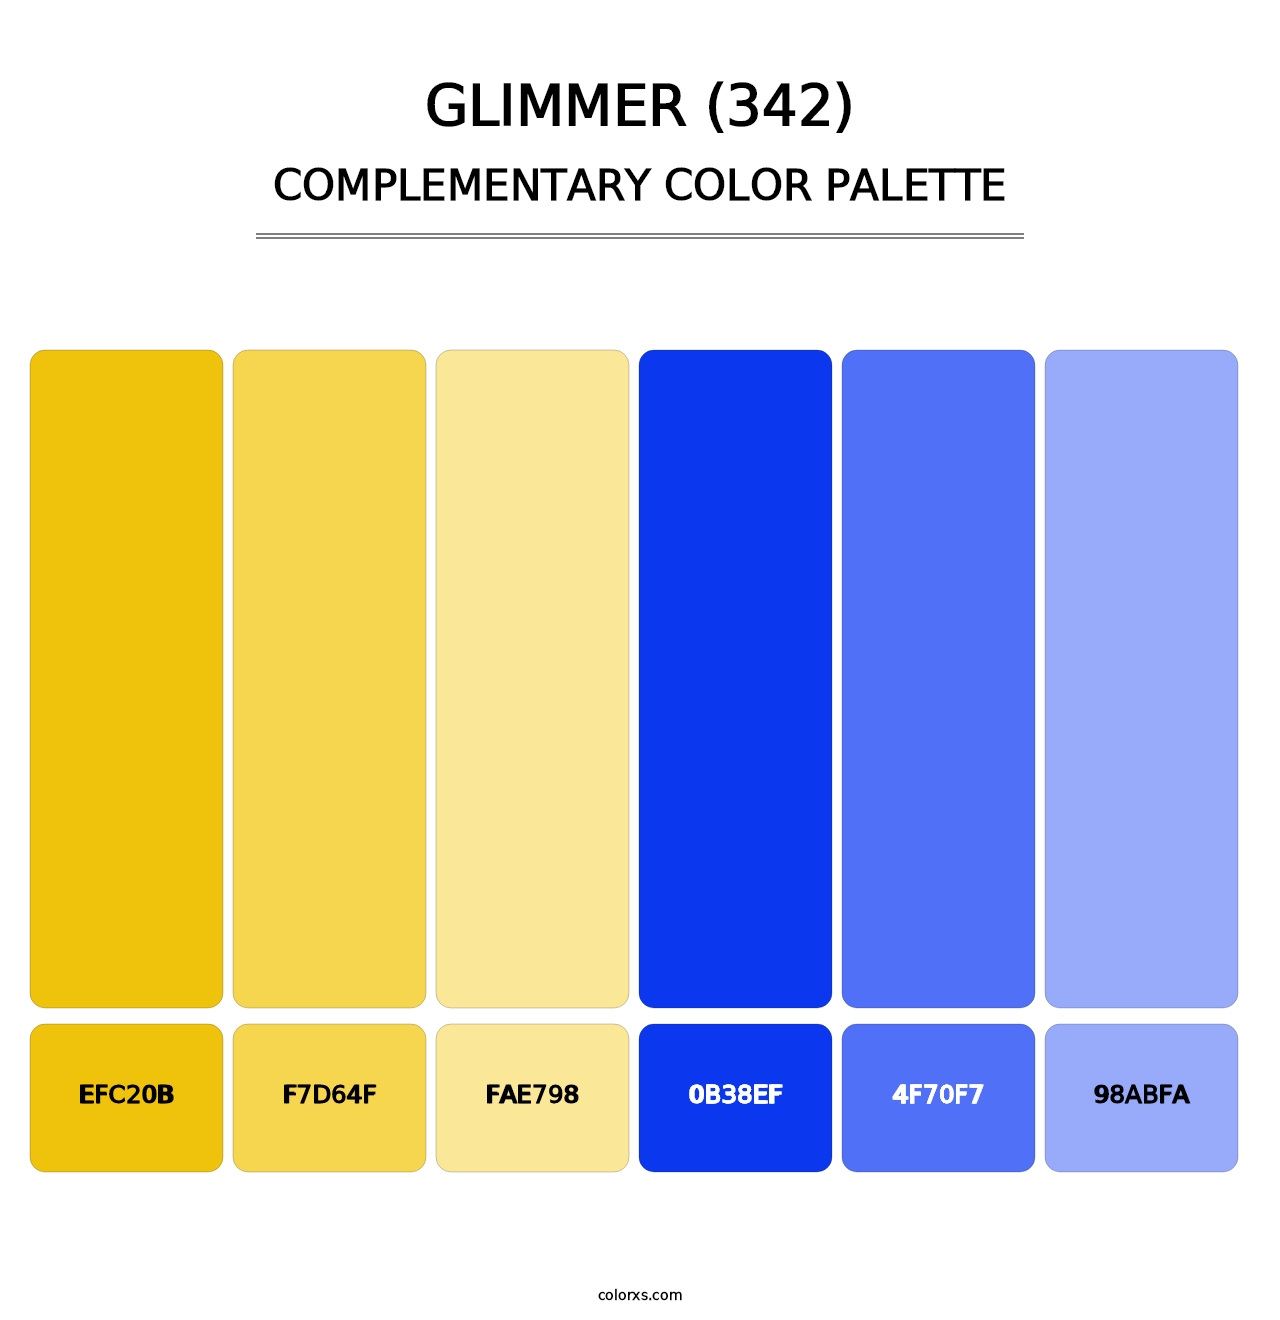 Glimmer (342) - Complementary Color Palette